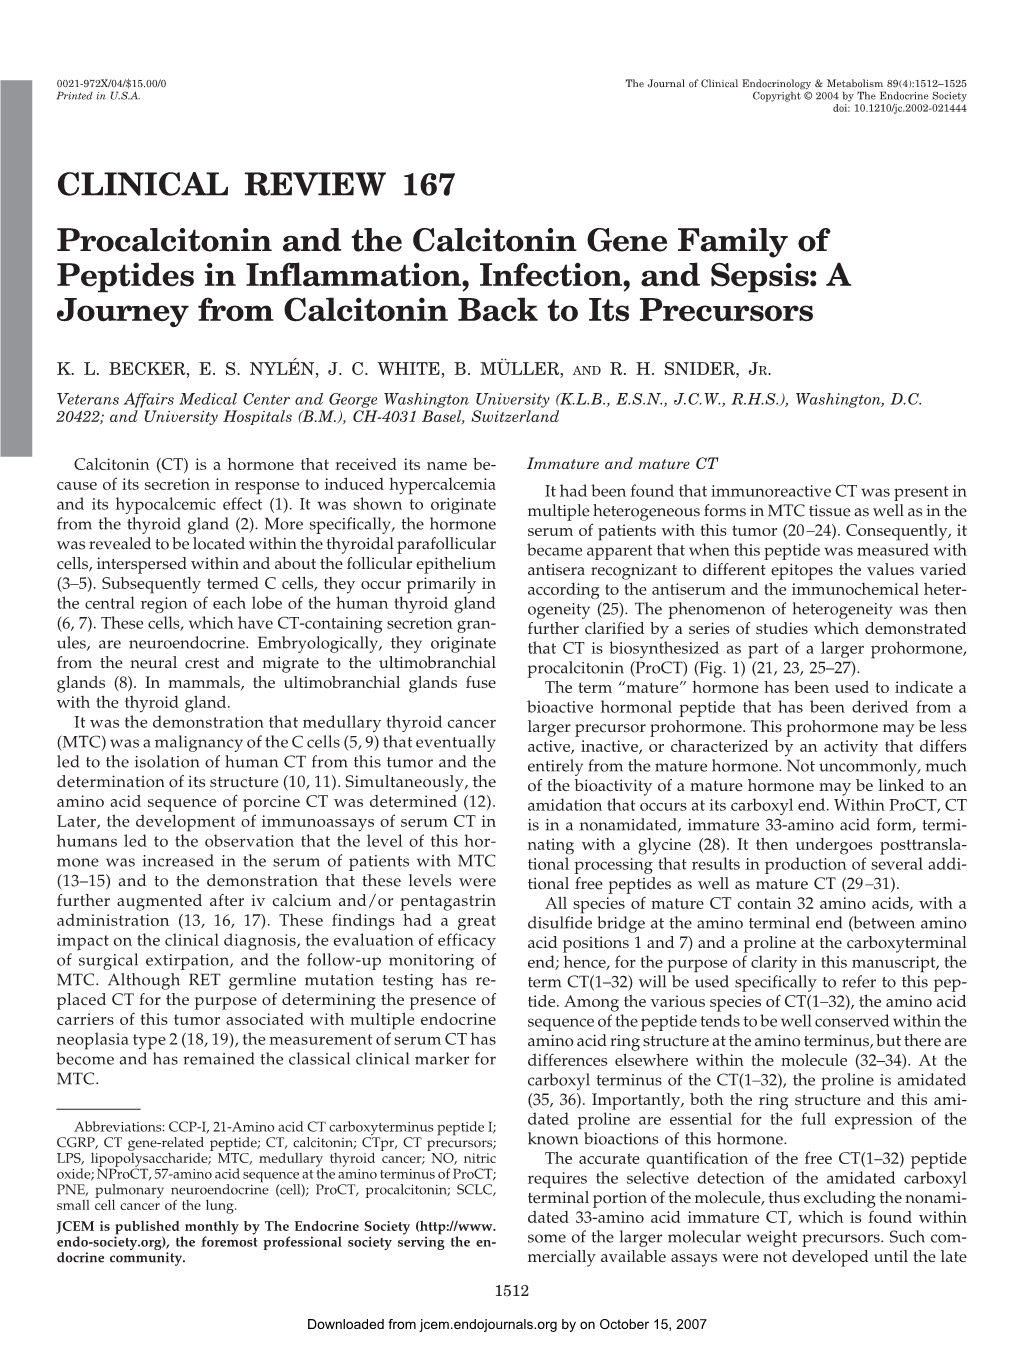 CLINICAL REVIEW 167 Procalcitonin and the Calcitonin Gene Family of Peptides in Inflammation, Infection, and Sepsis: a Journey from Calcitonin Back to Its Precursors